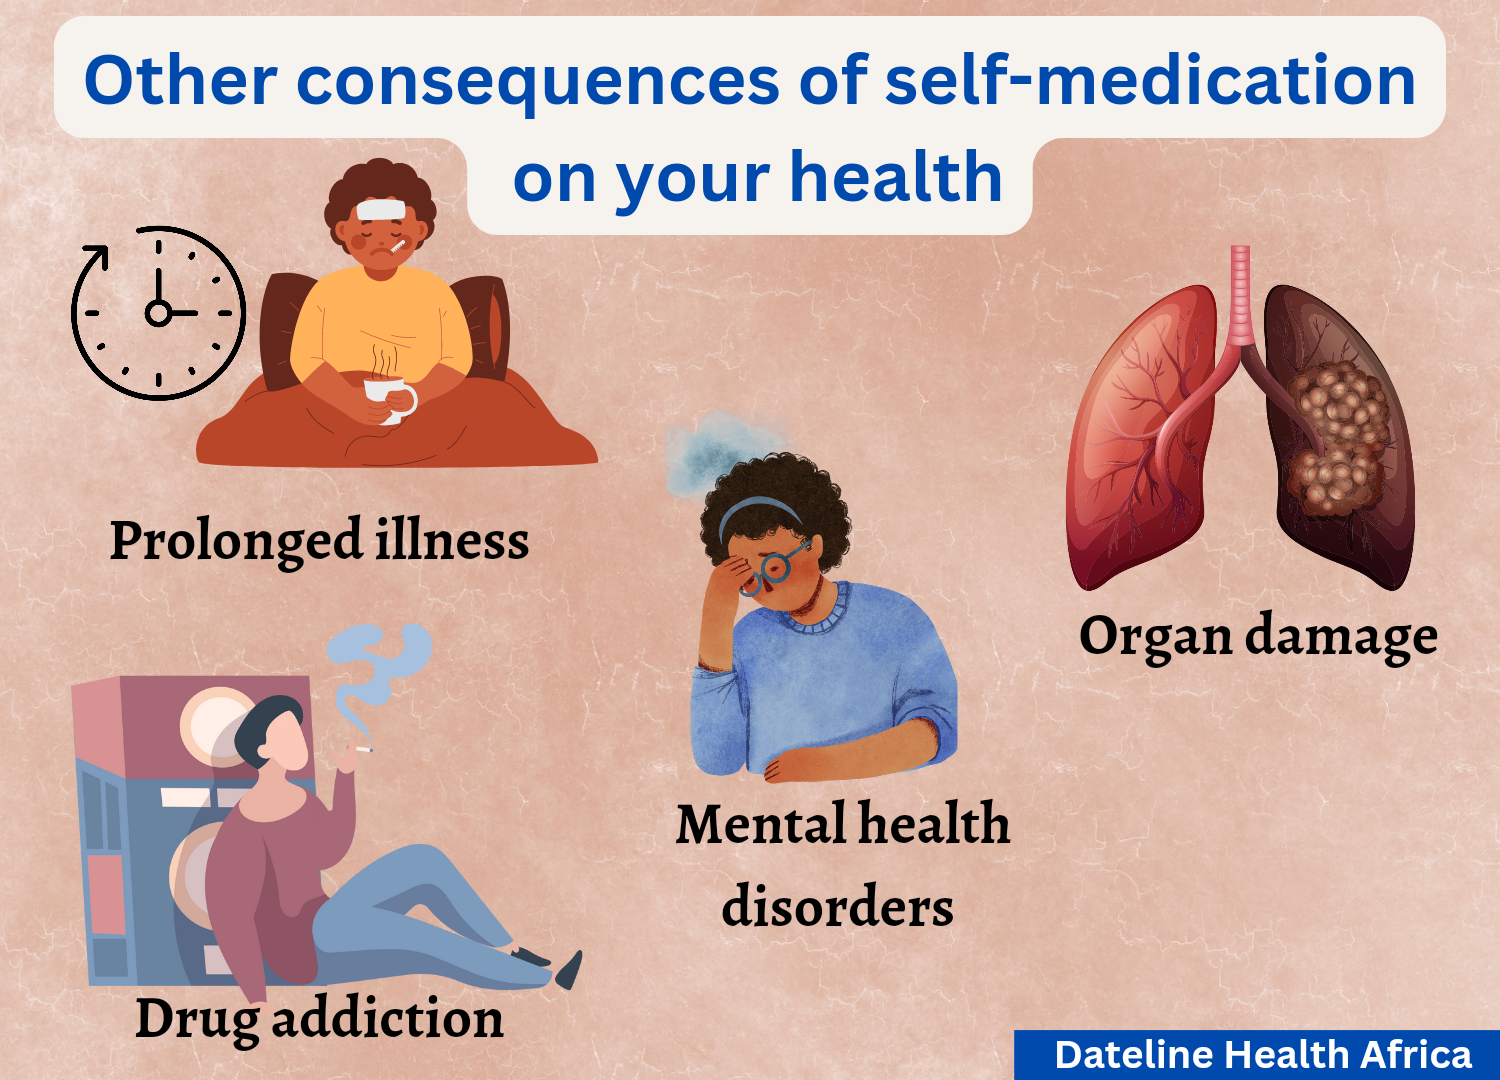 Additional consequences of self-medication on health